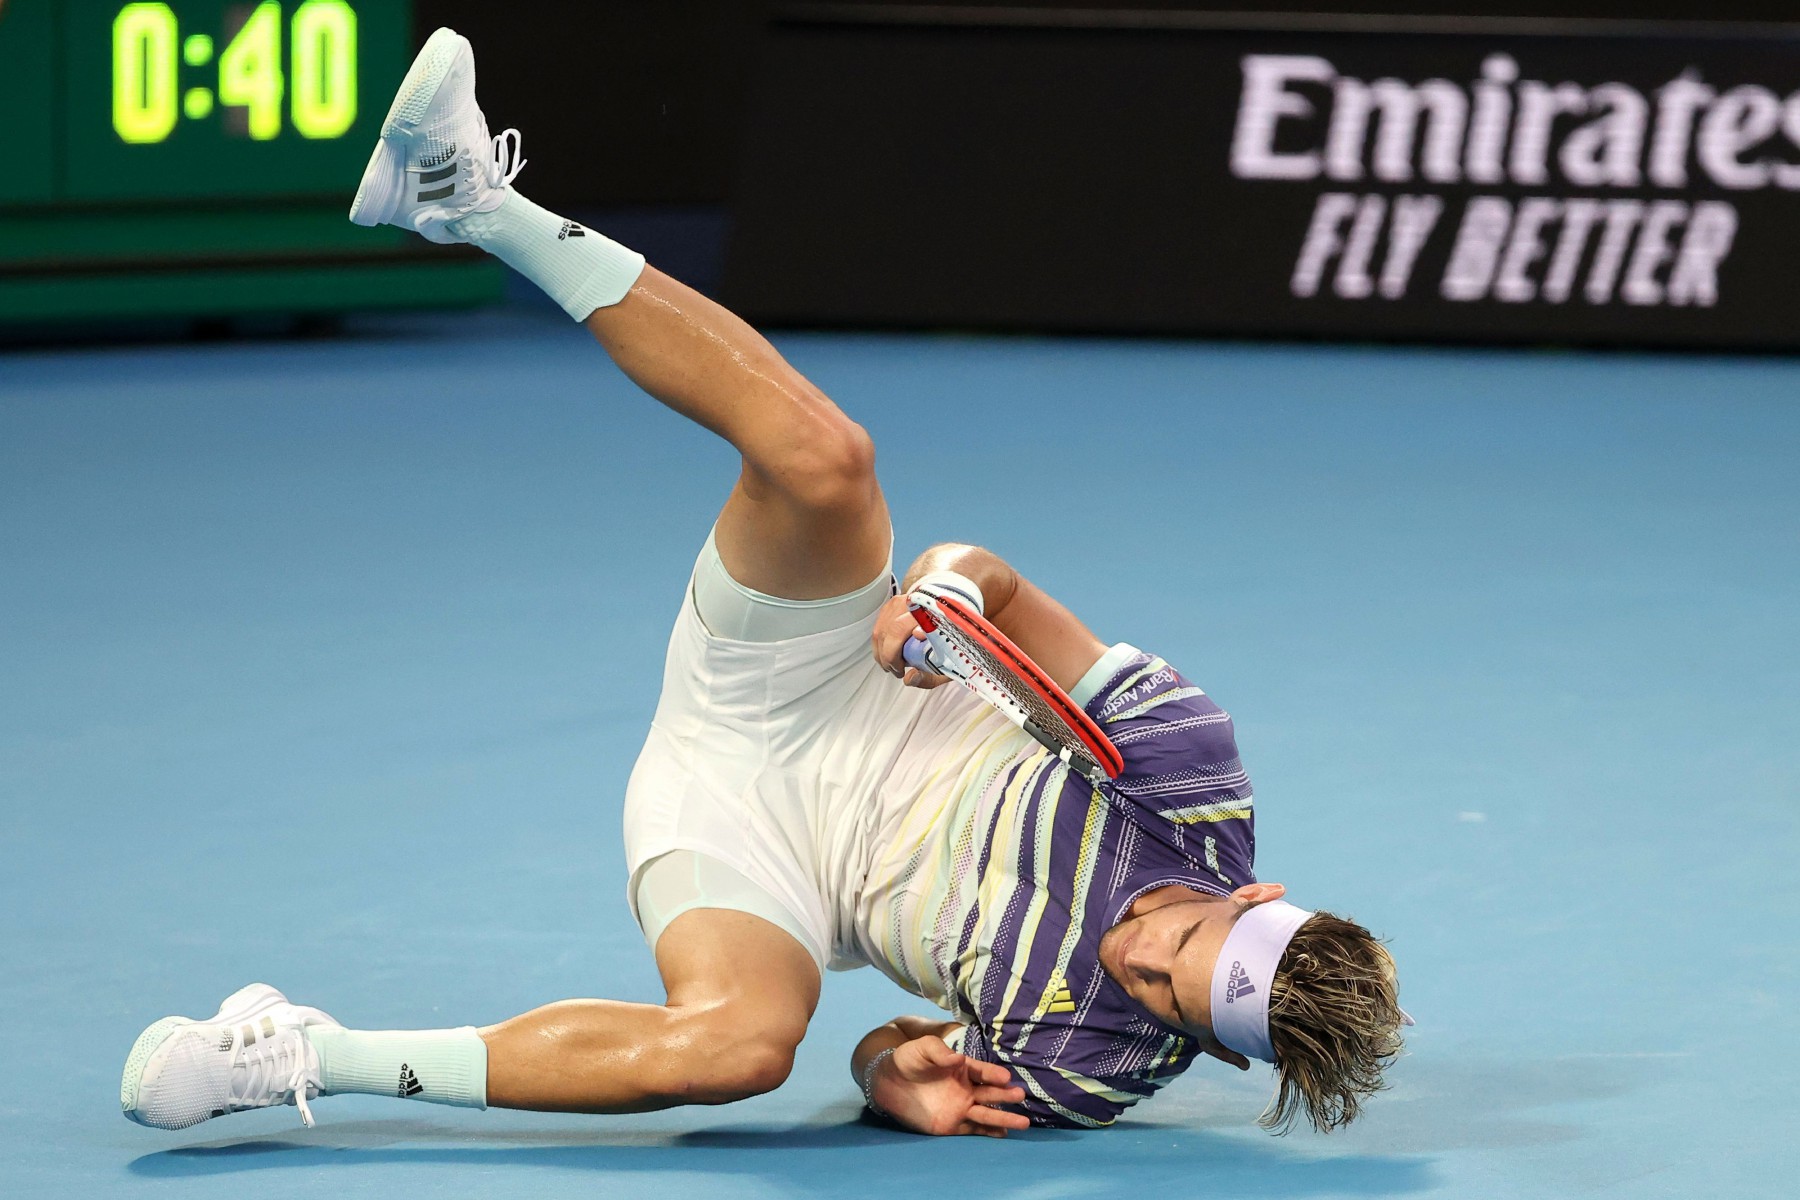 Thiem took a couple of tumbles but bounced back every time to beat Nadal in a Grand Slam for the first time